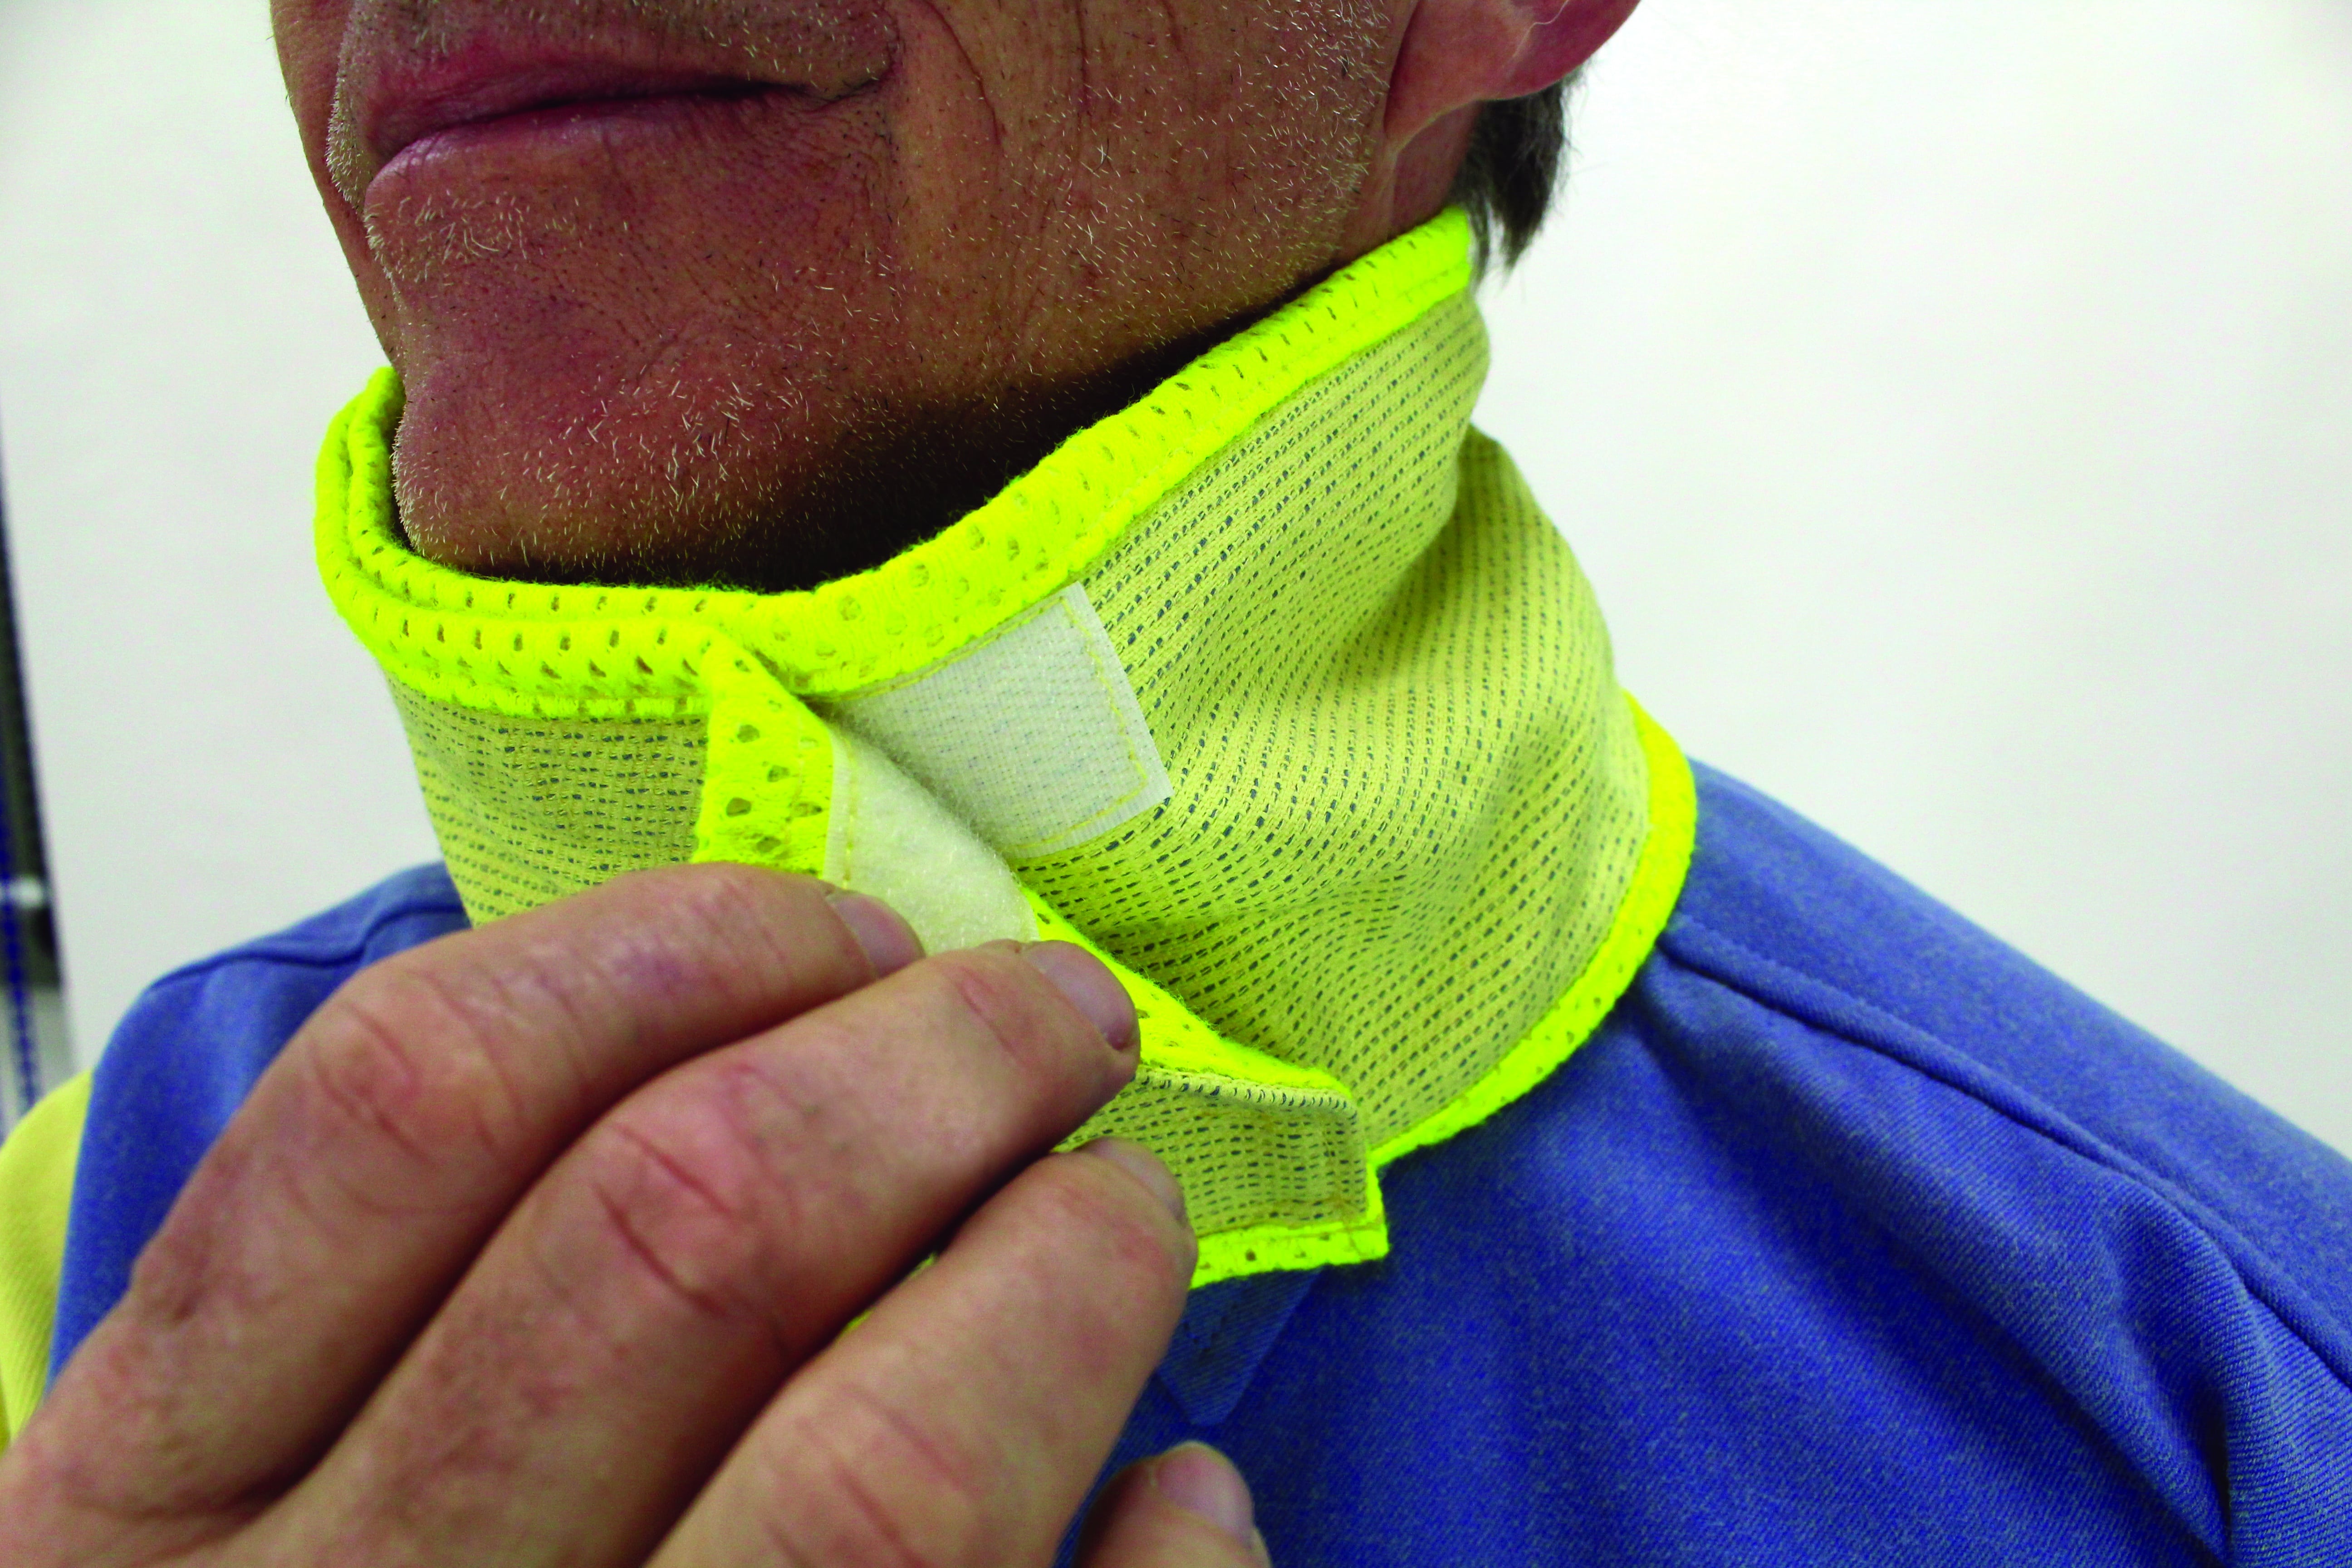 Neck Protection for Glass Handlers